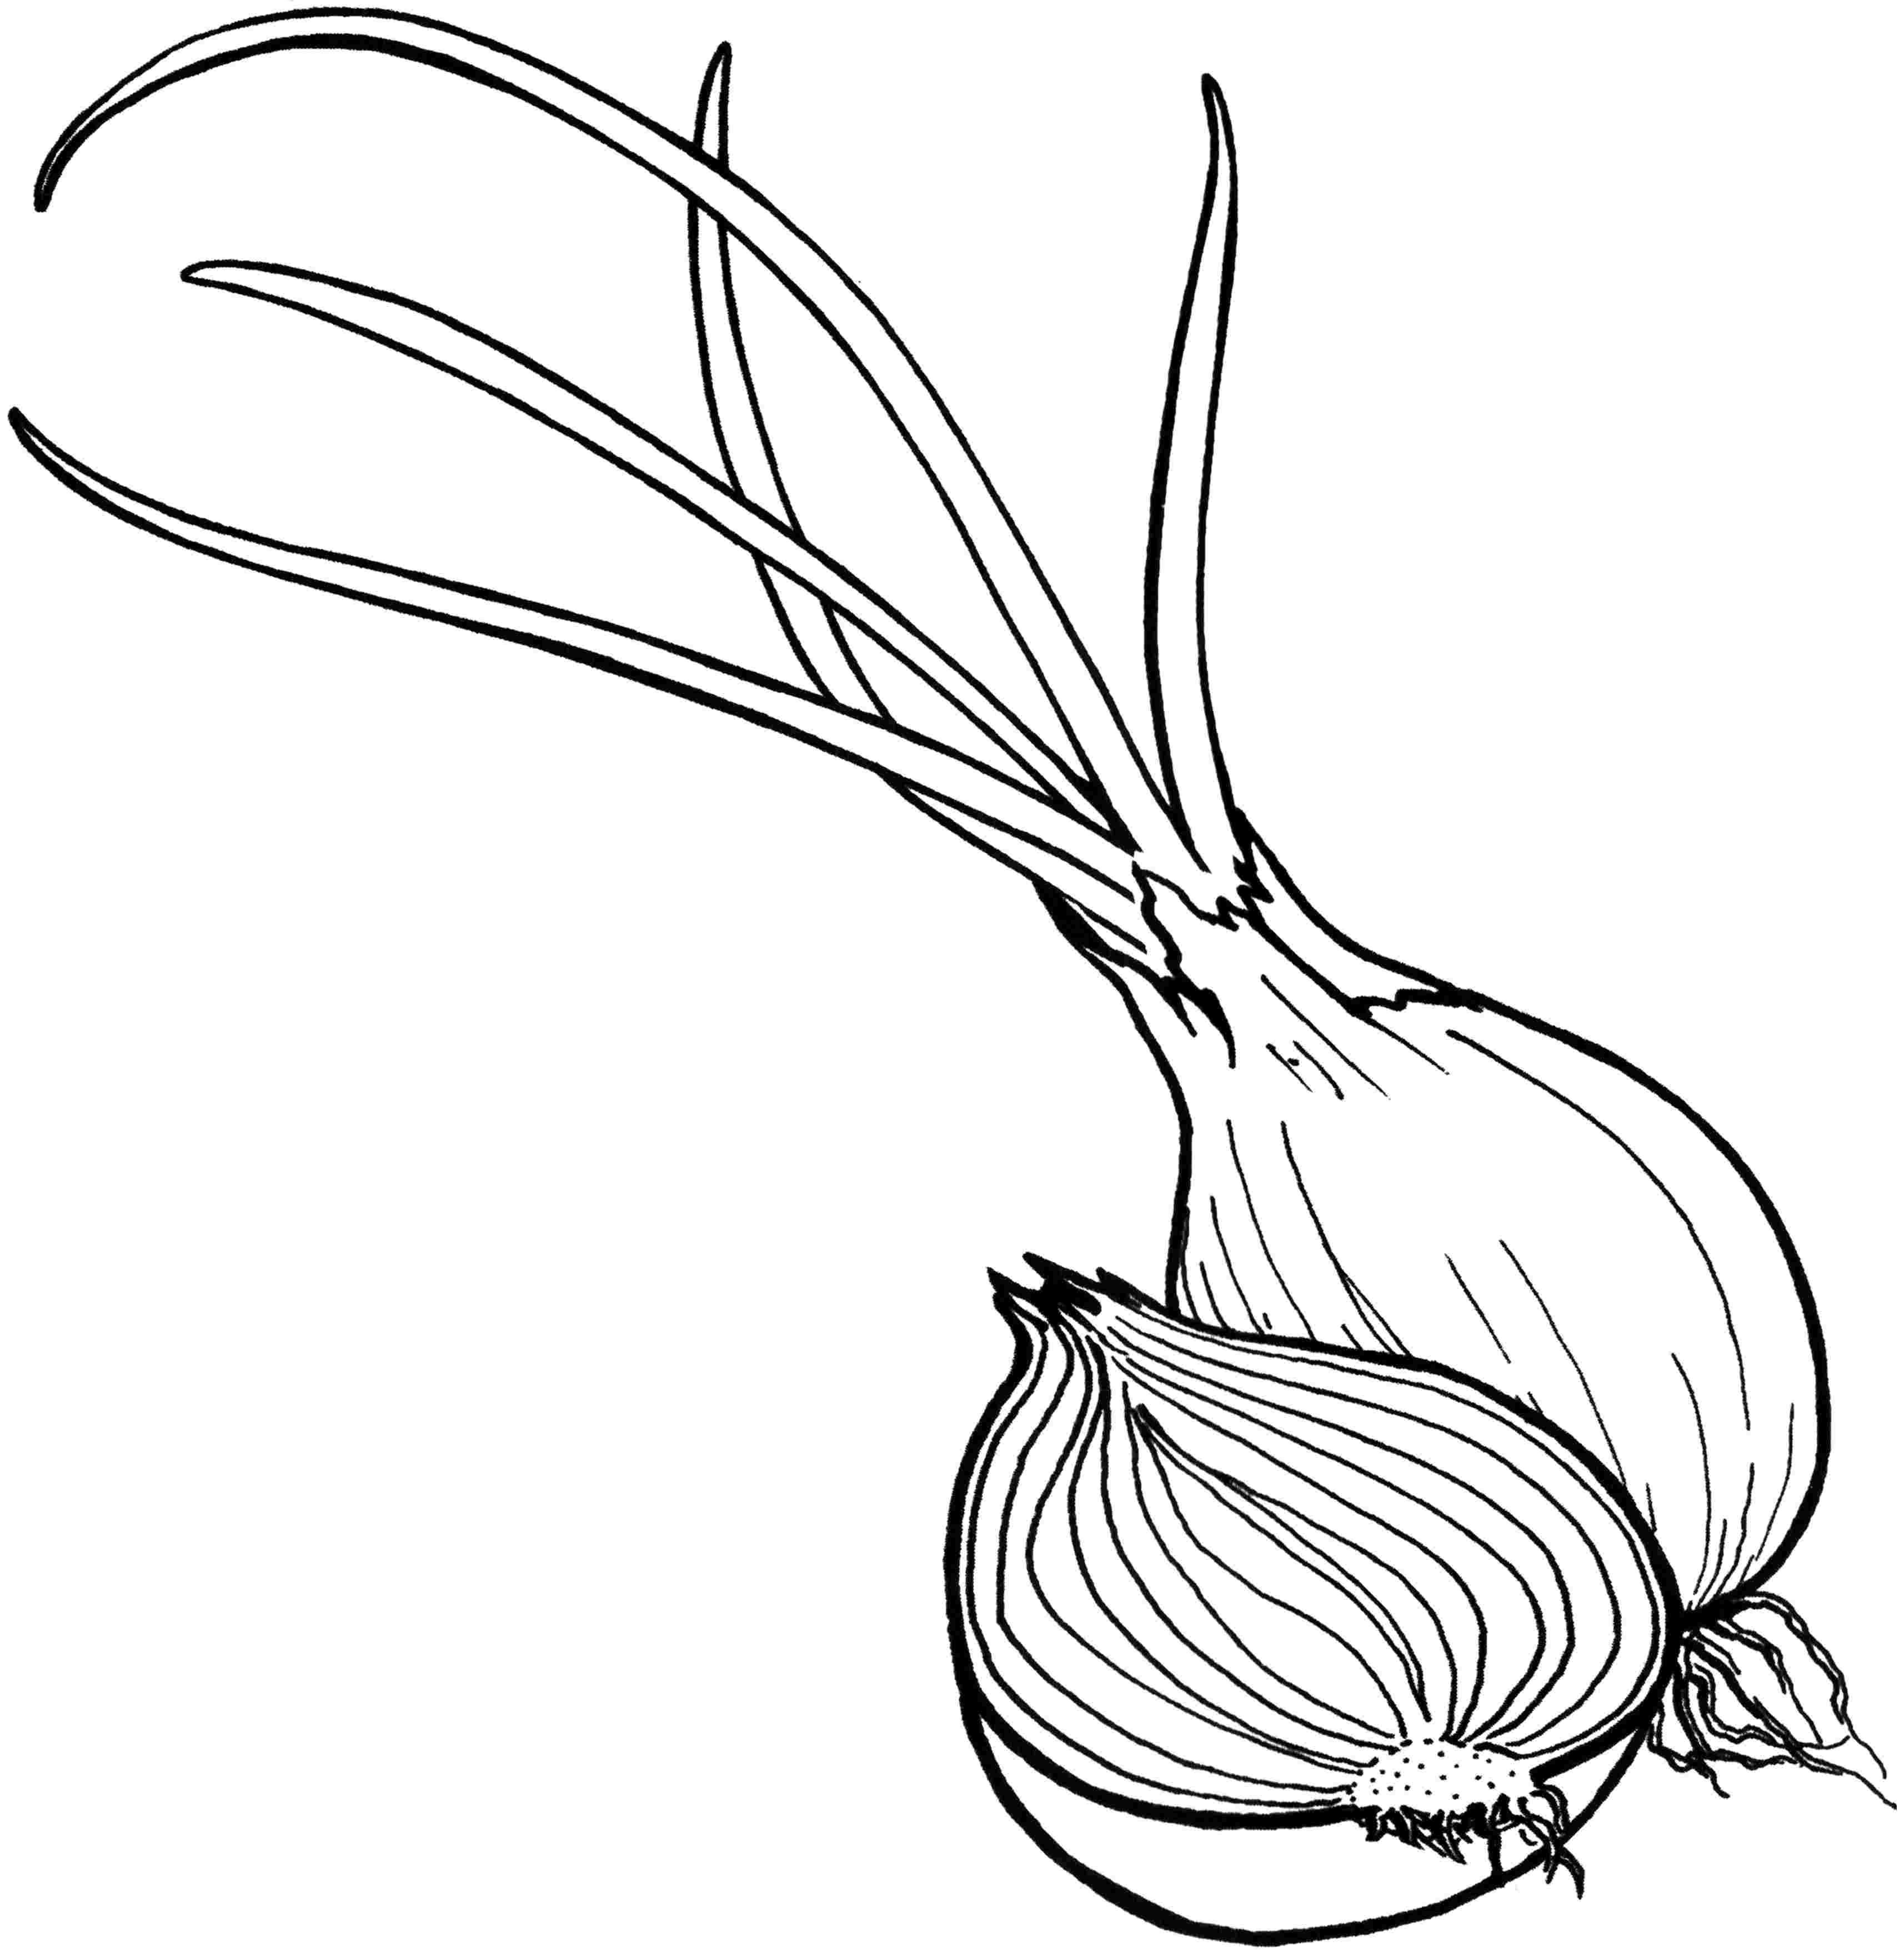 Animal Onion Coloring Page for Adult